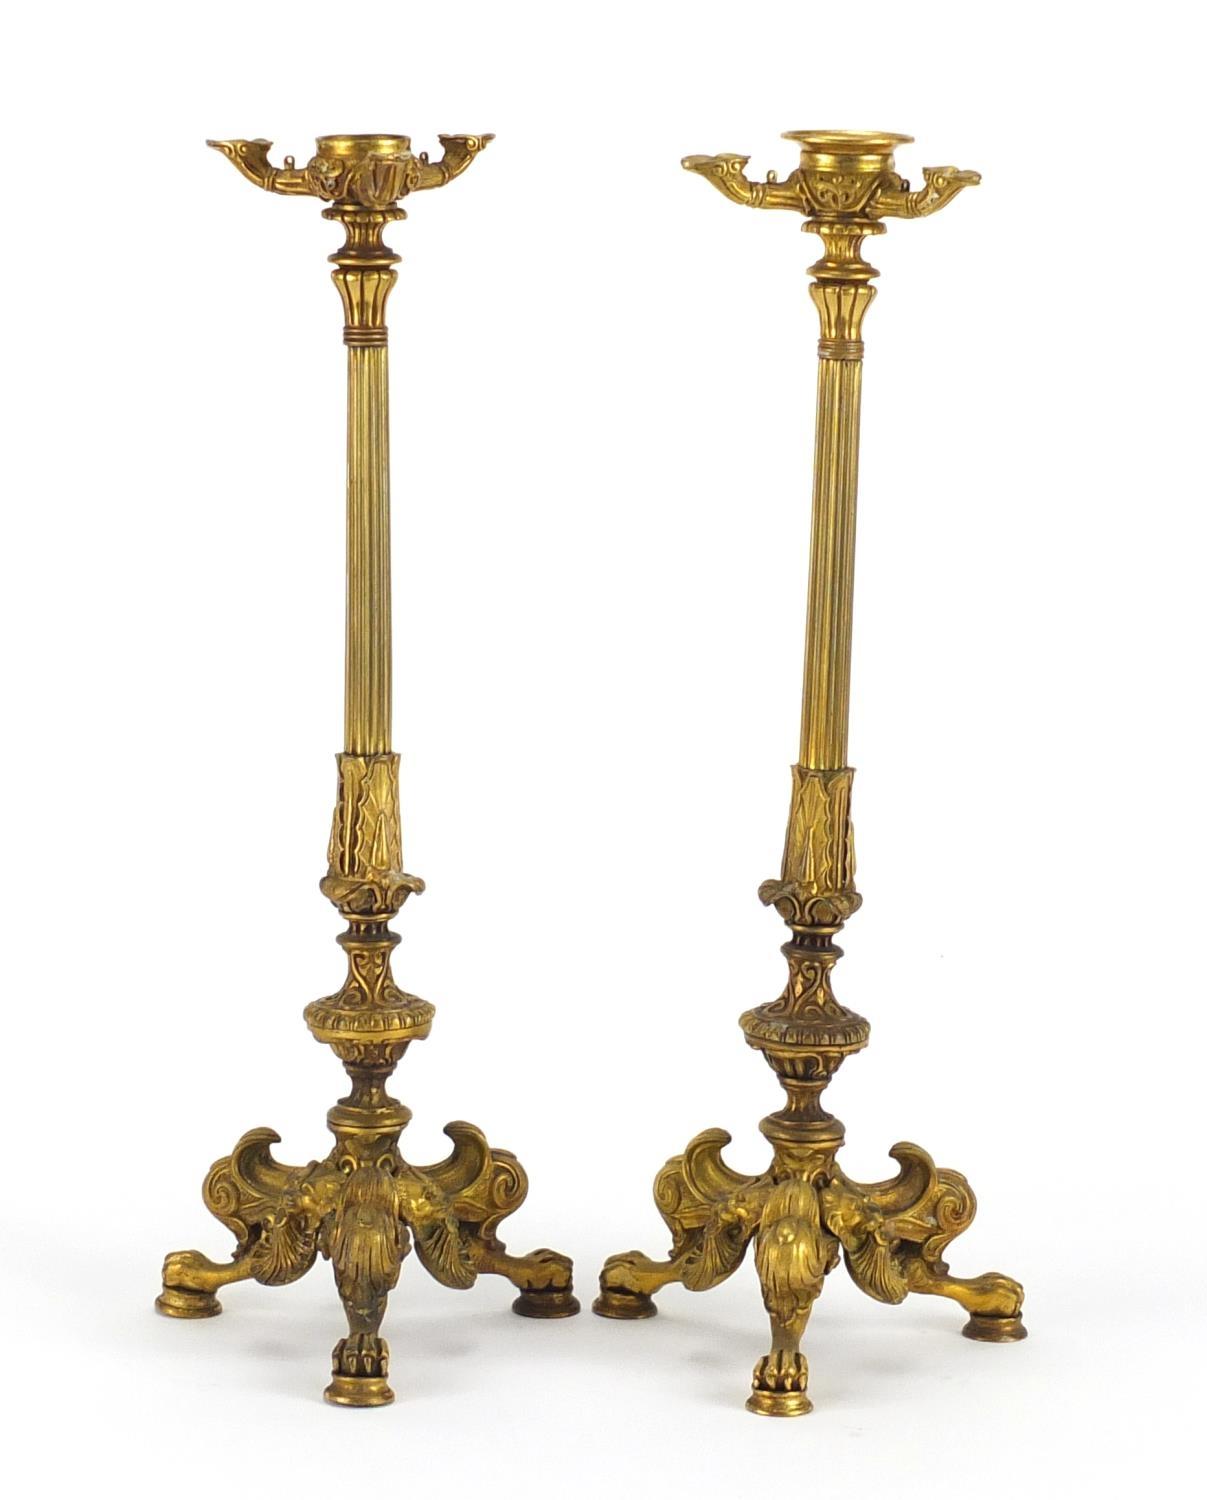 Pair of 19th century ormolu candlesticks with reeded columns, lion masks and claw feet, each 34. - Image 5 of 6